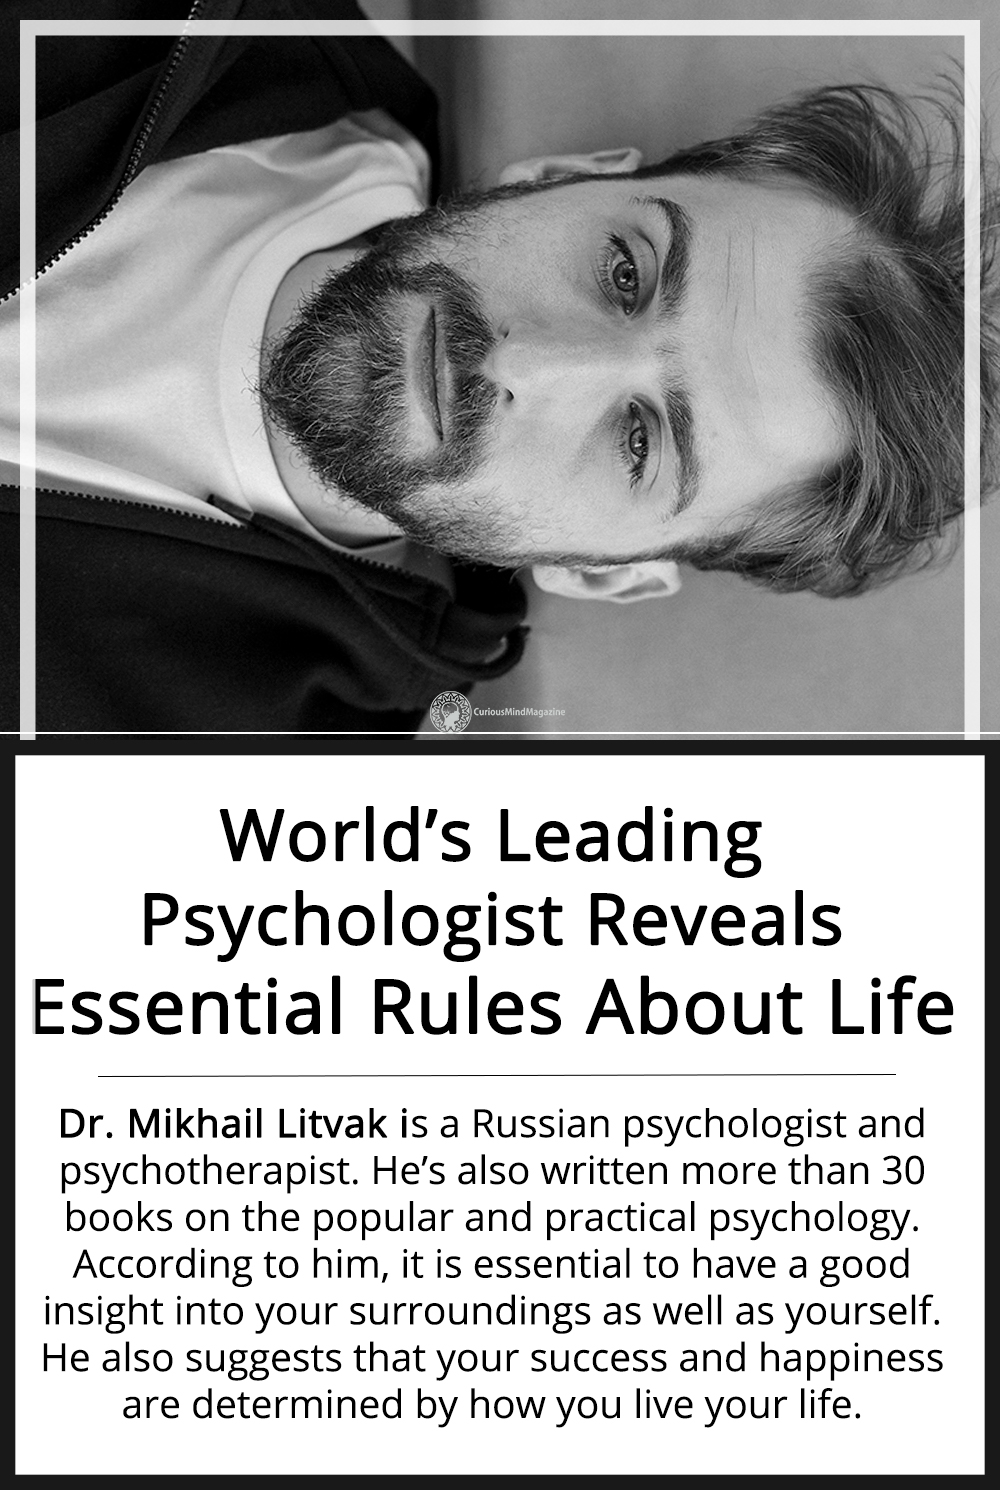 World’s Leading Psychologist Reveals Essential Rules About Life